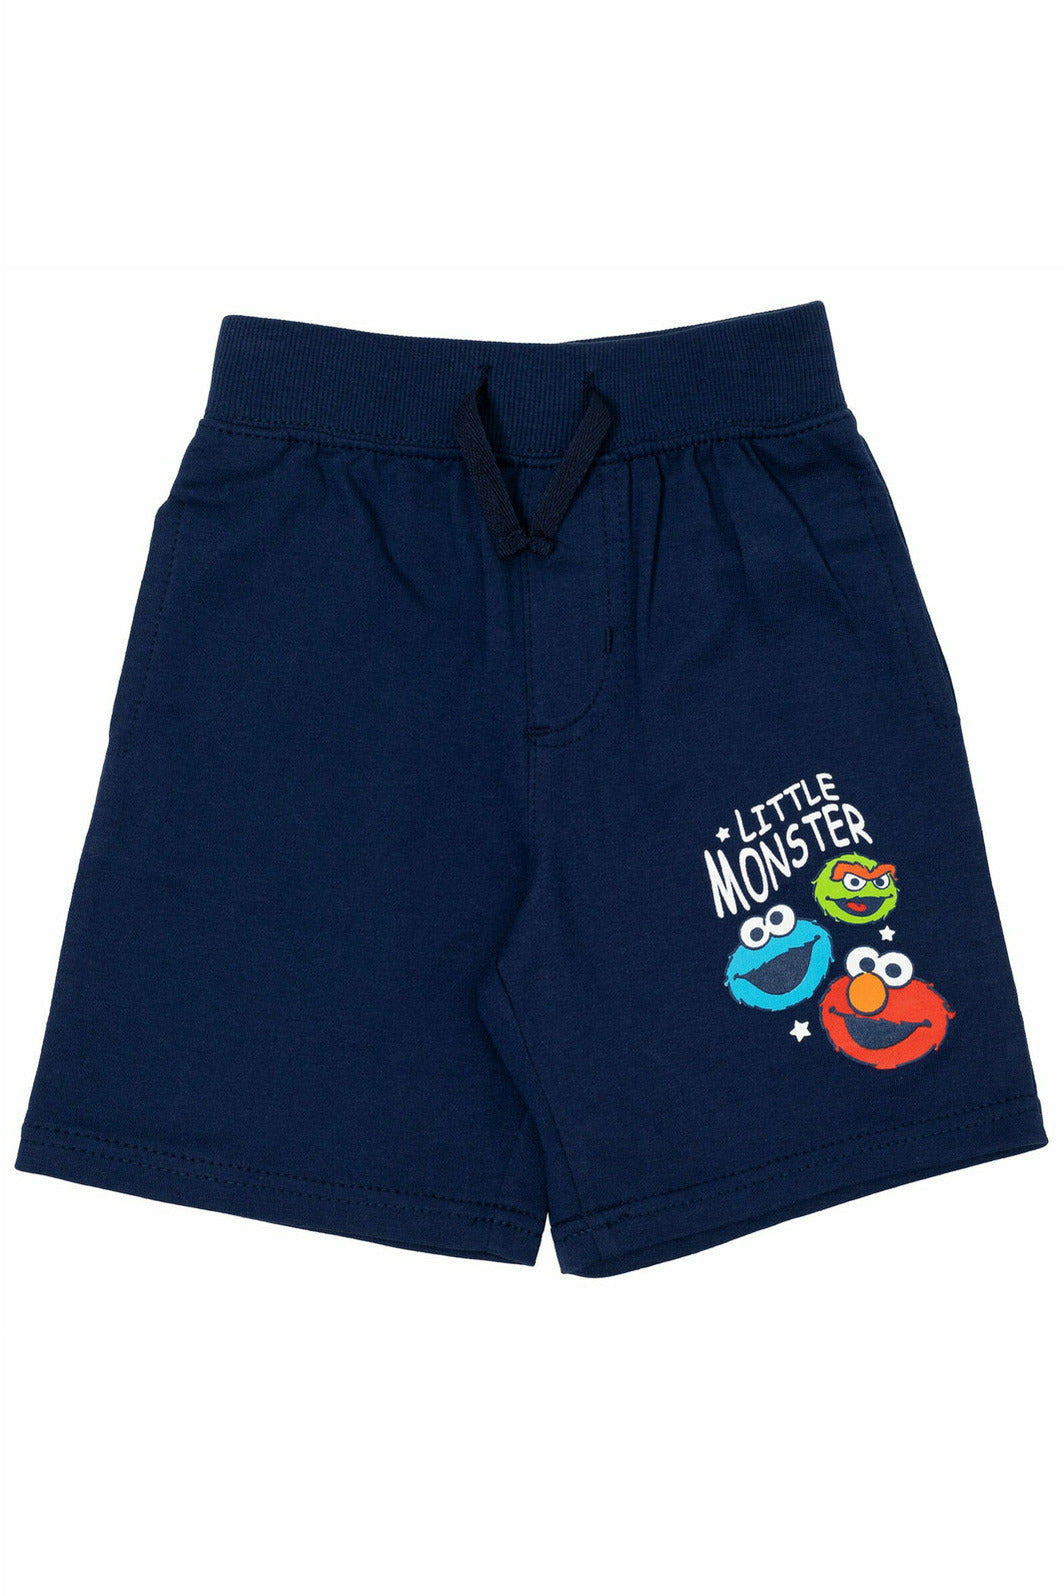 Sesame Street French Terry 3 Pack Shorts